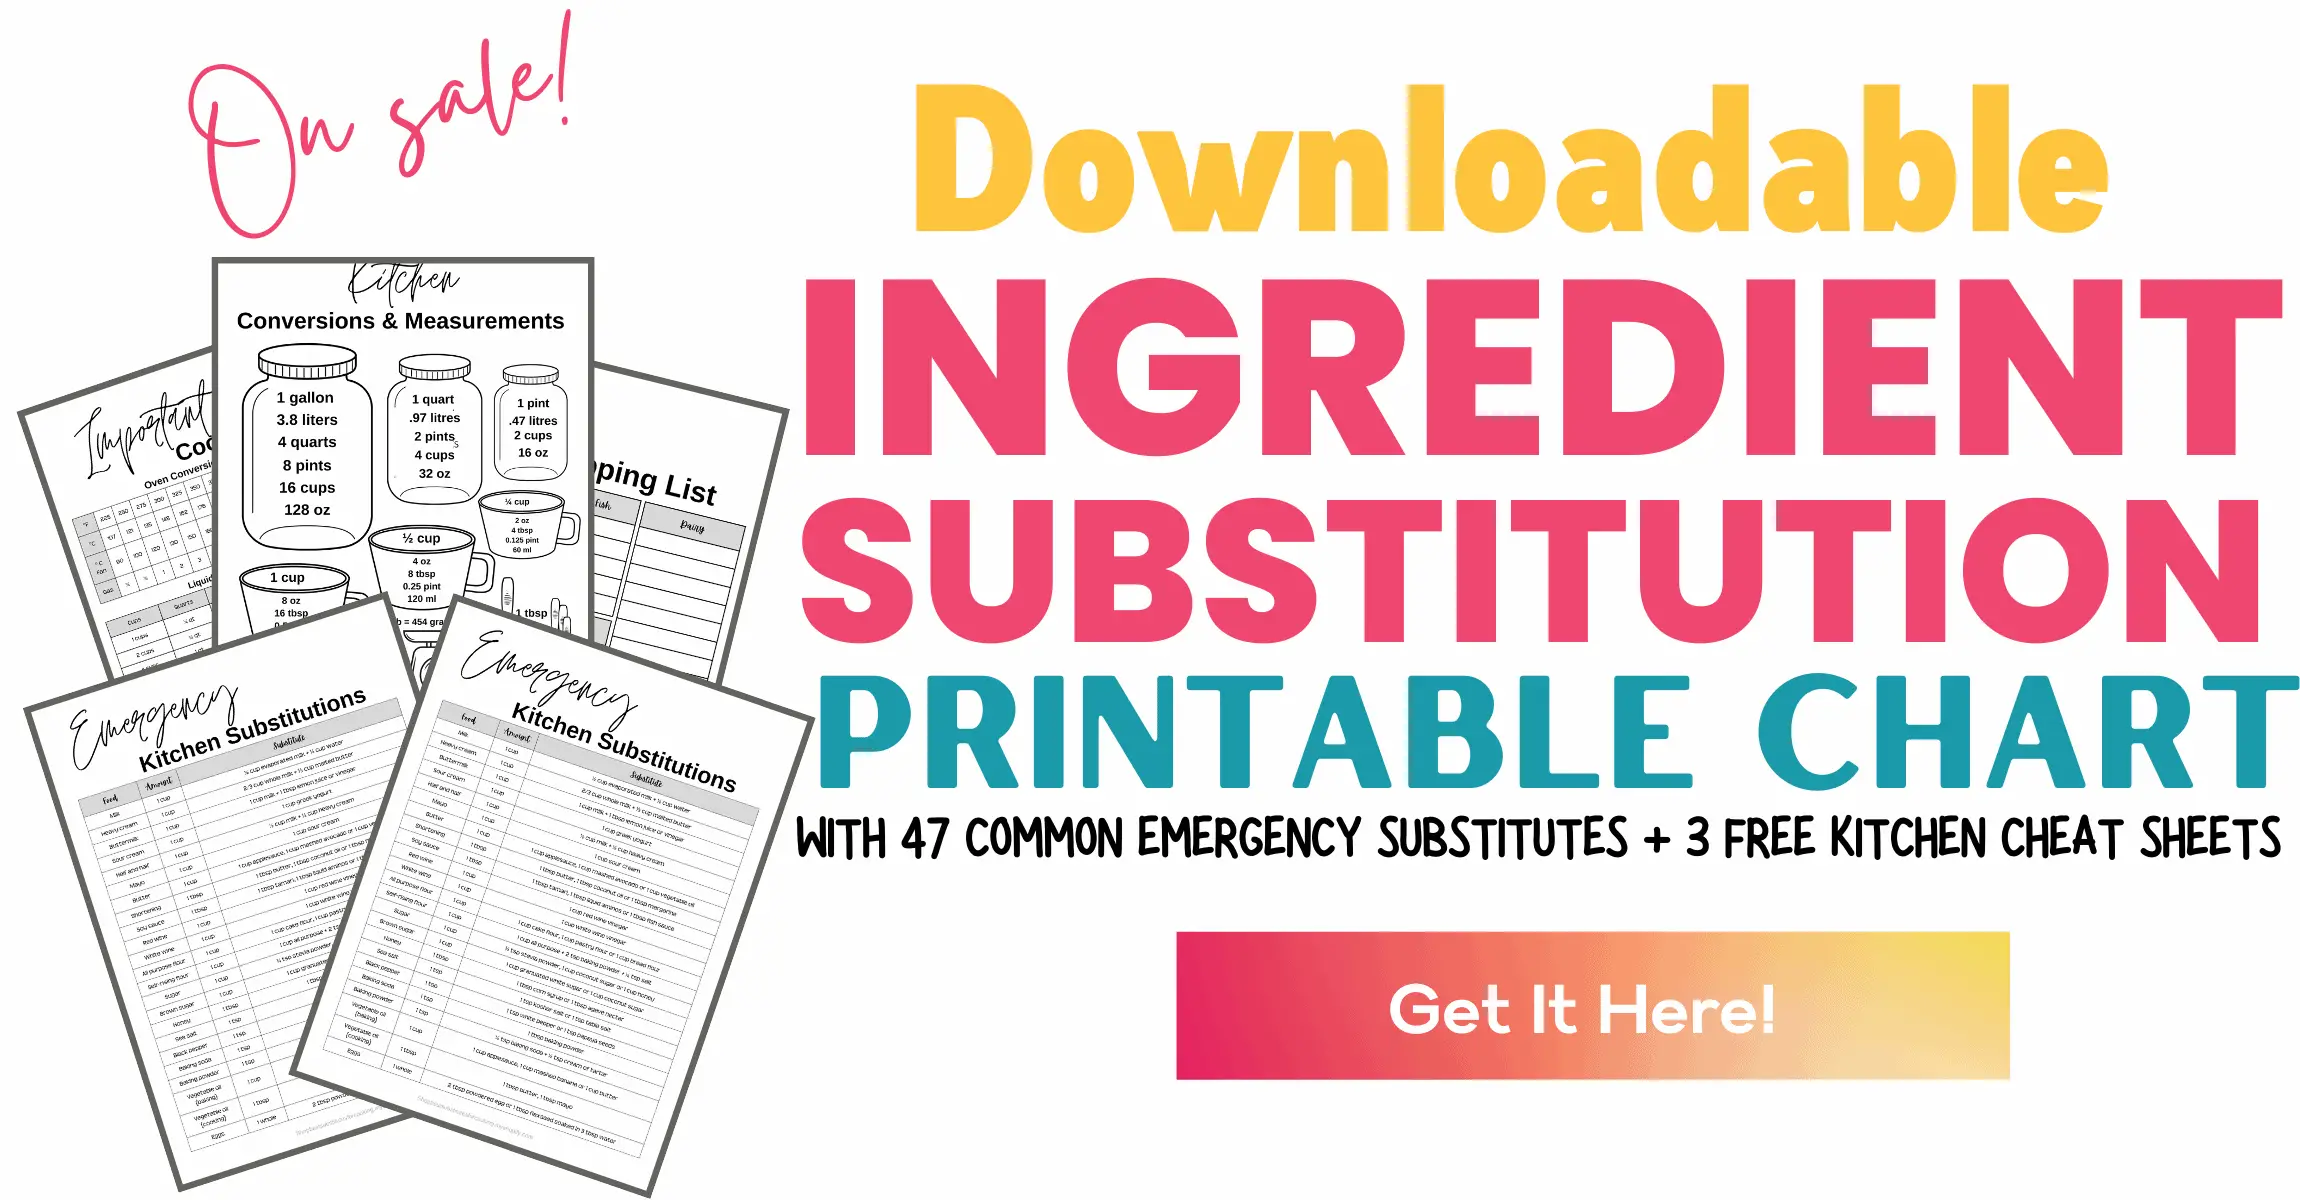 Downloadable substitution cheat sheet